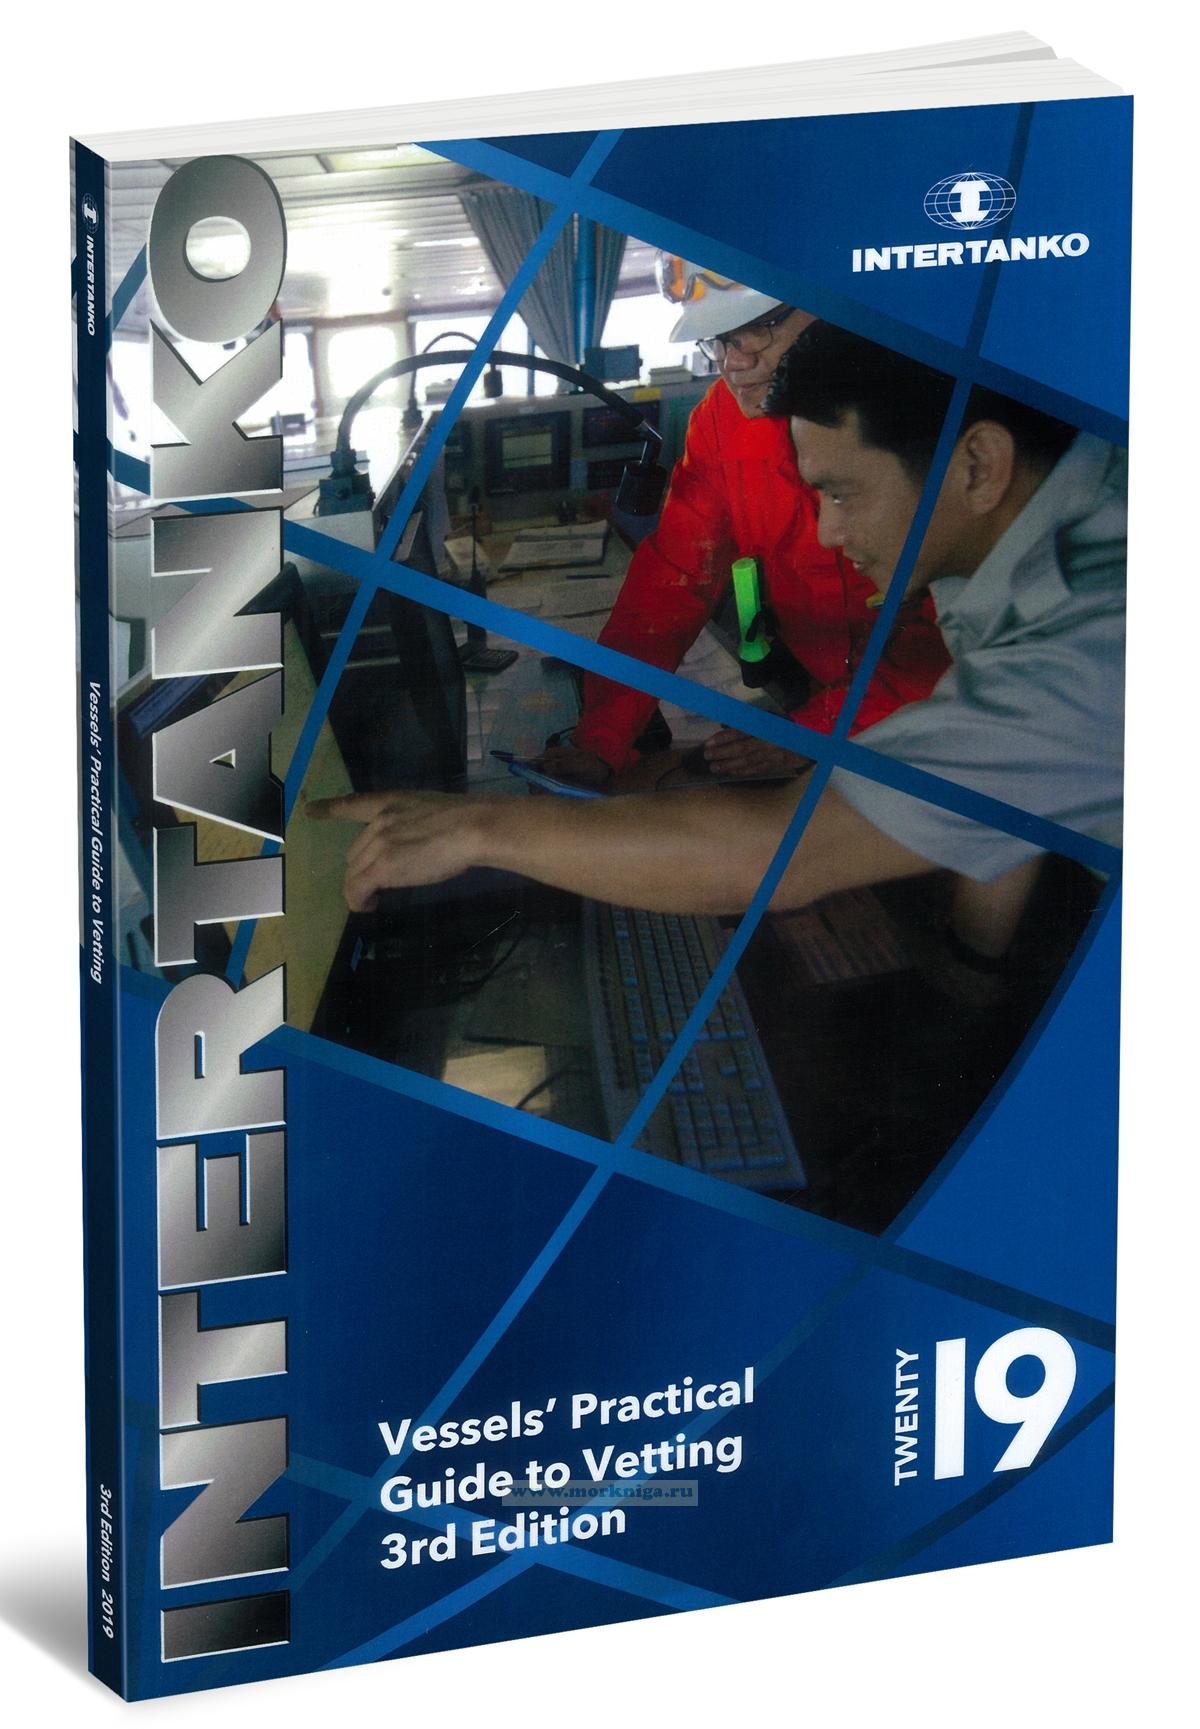 Vessels' Practical Guide to Vetting